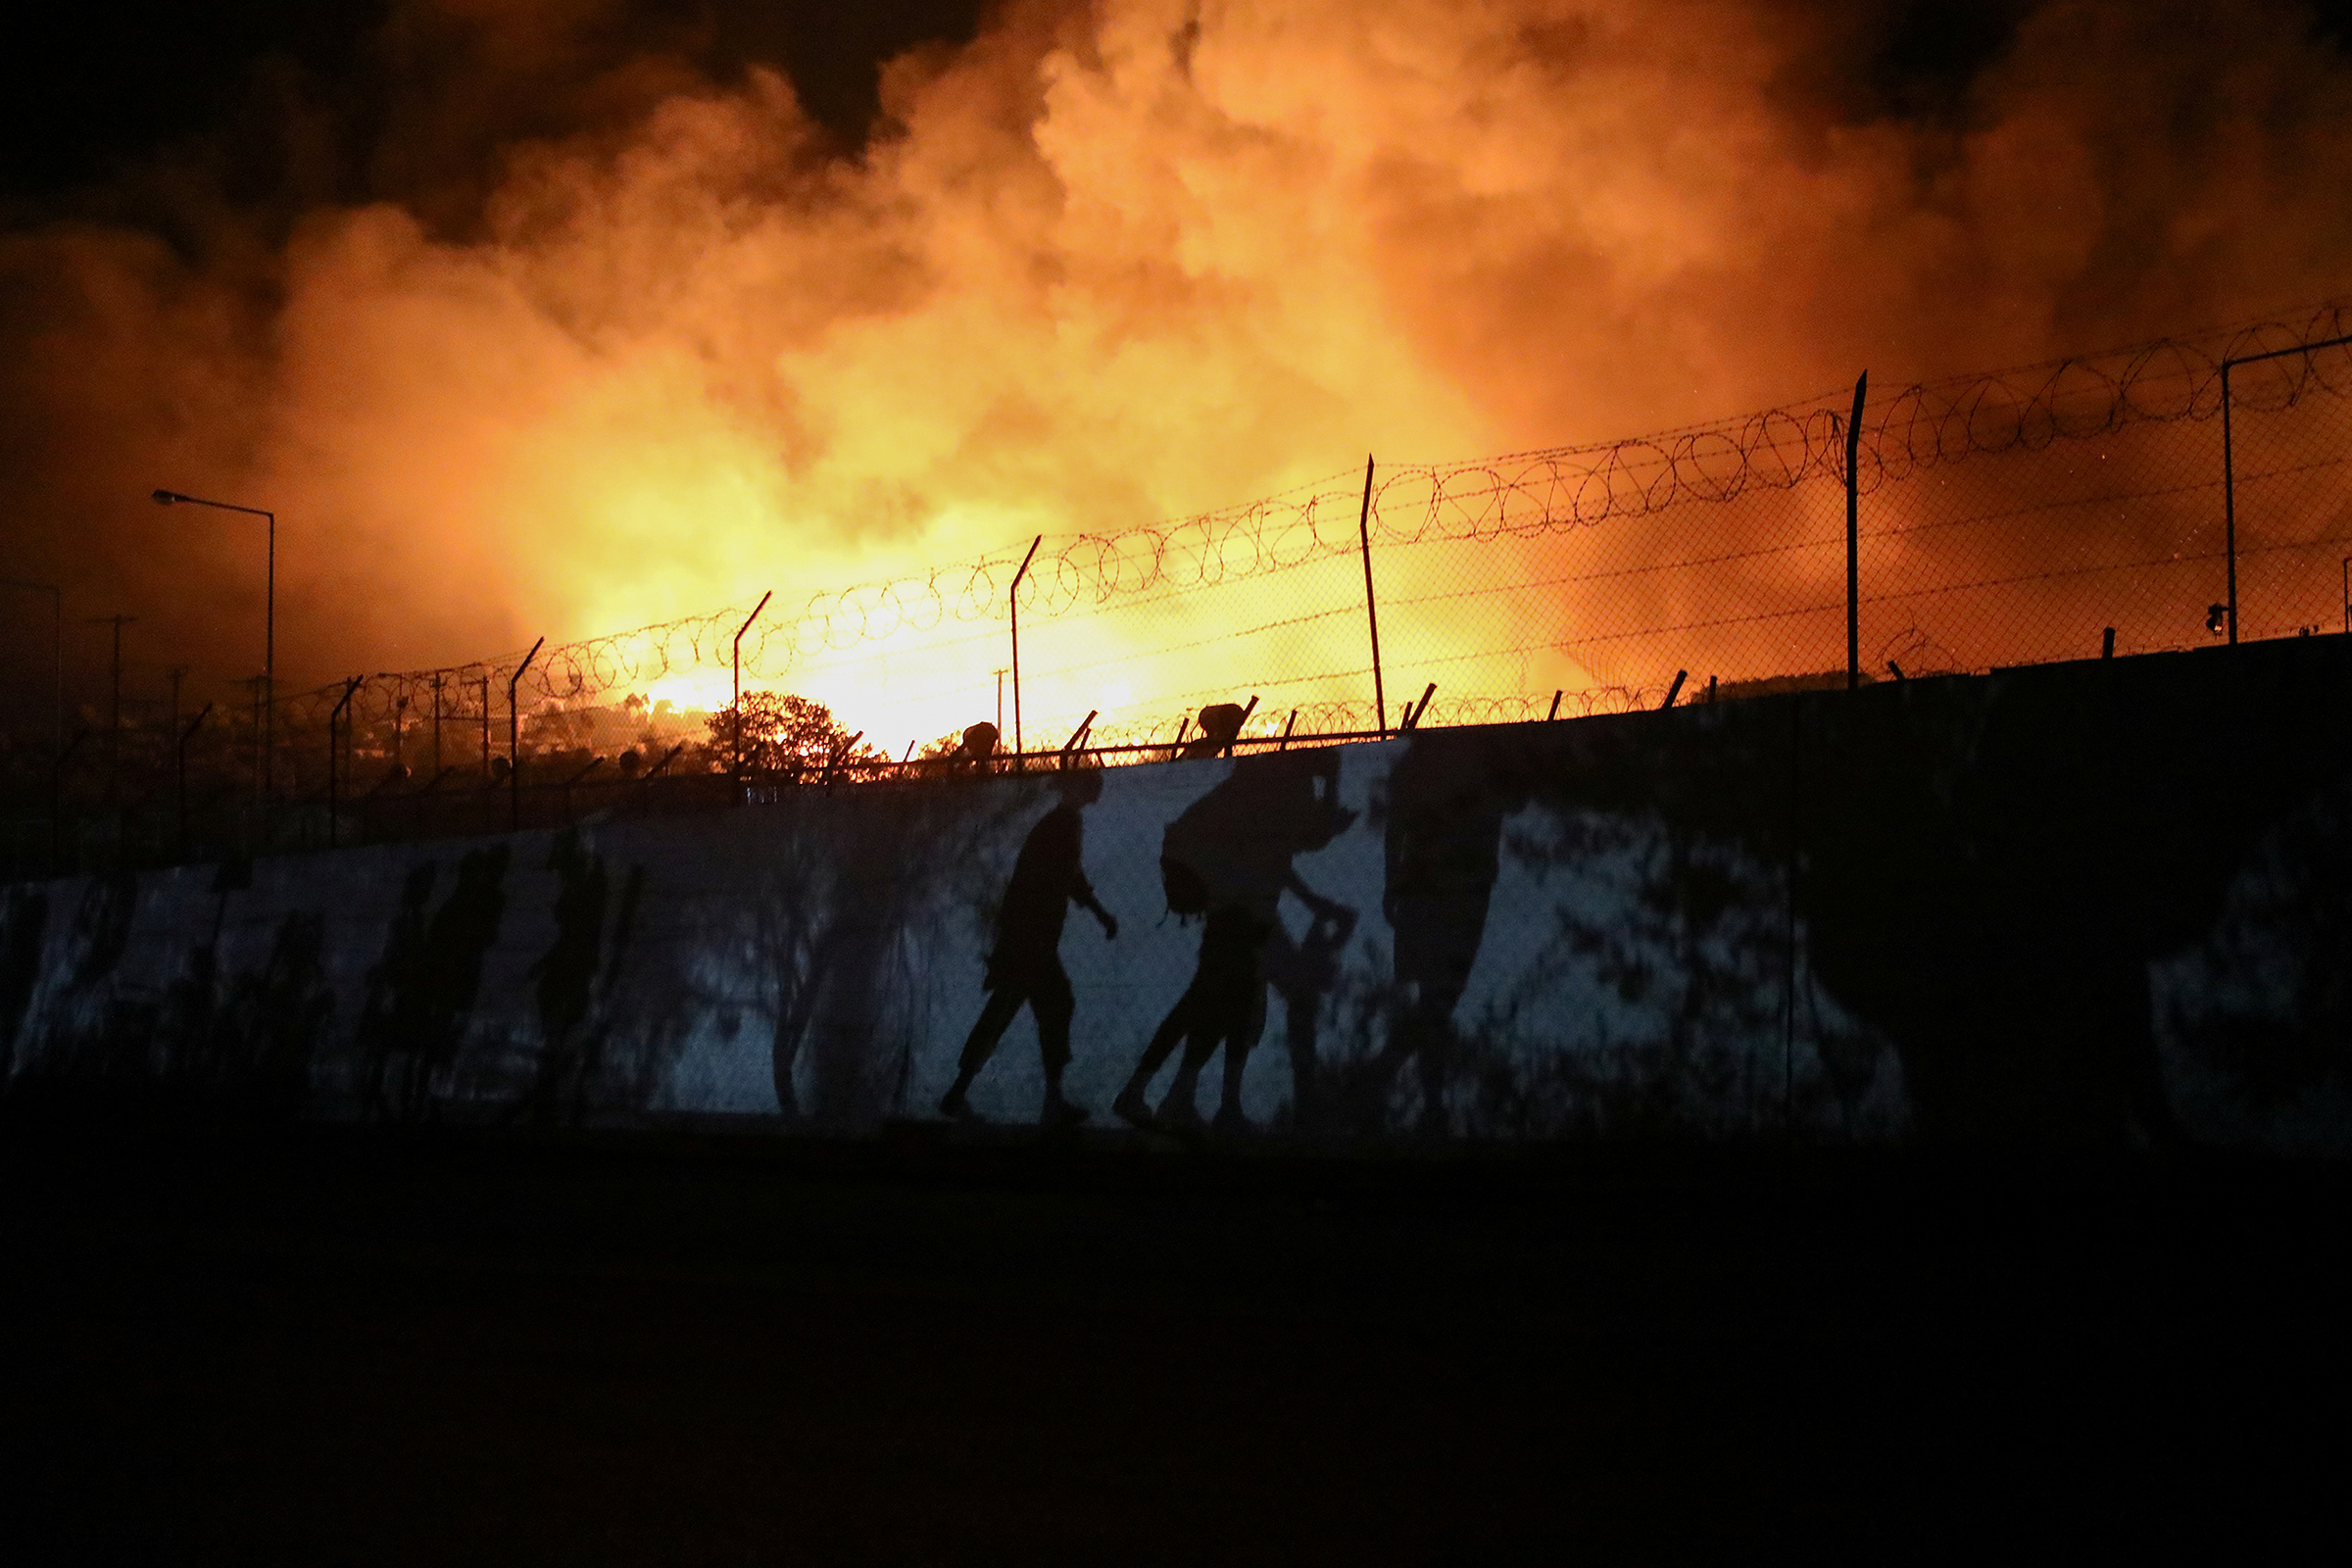 Shadows of refugees and migrants carrying their belongings are seen as they flee from a fire at the Moria camp on the Greek island of Lesbos on Sept. 9. (Elias Marcou—Reuters)